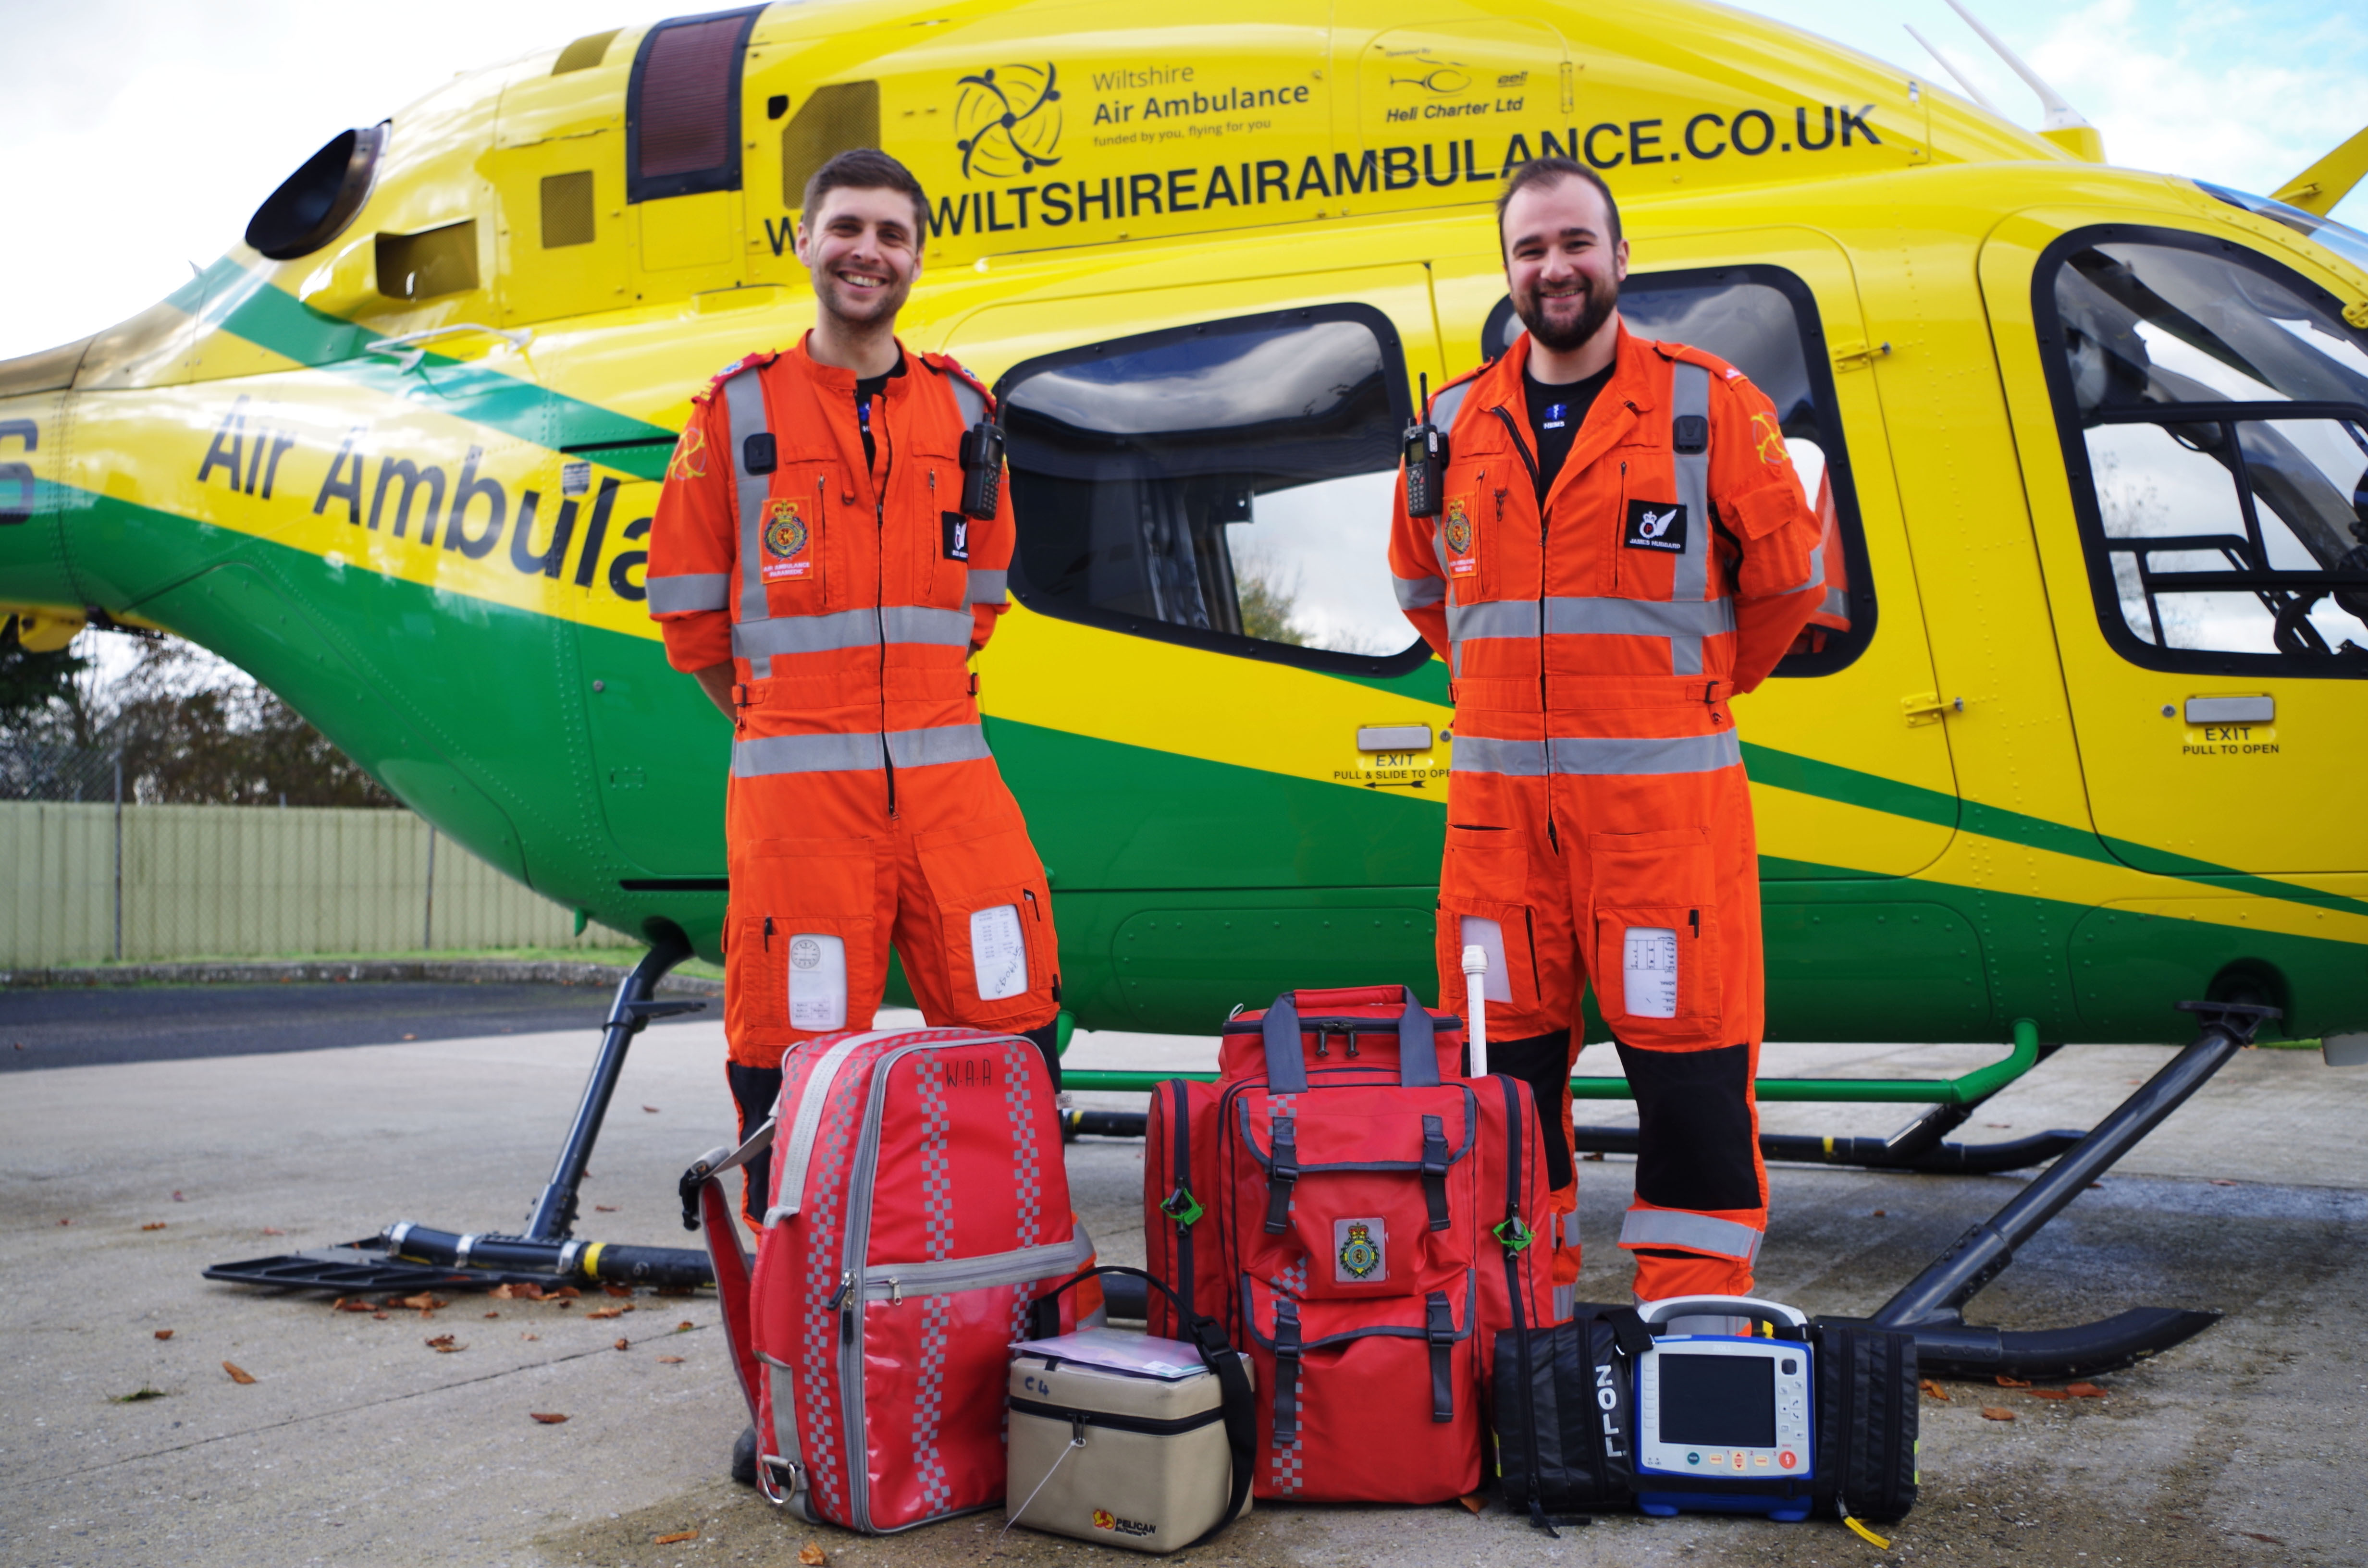 • Wiltshire Air Ambulance has been saving lives for 27 years. The charity shared a helicopter with Wiltshire Police for 24 years until it became a stand-alone air ambulance on Jan. 9, 2015. It then began operating its own helicopter, a Bell 429. Wiltshire Air Ambulance Photo